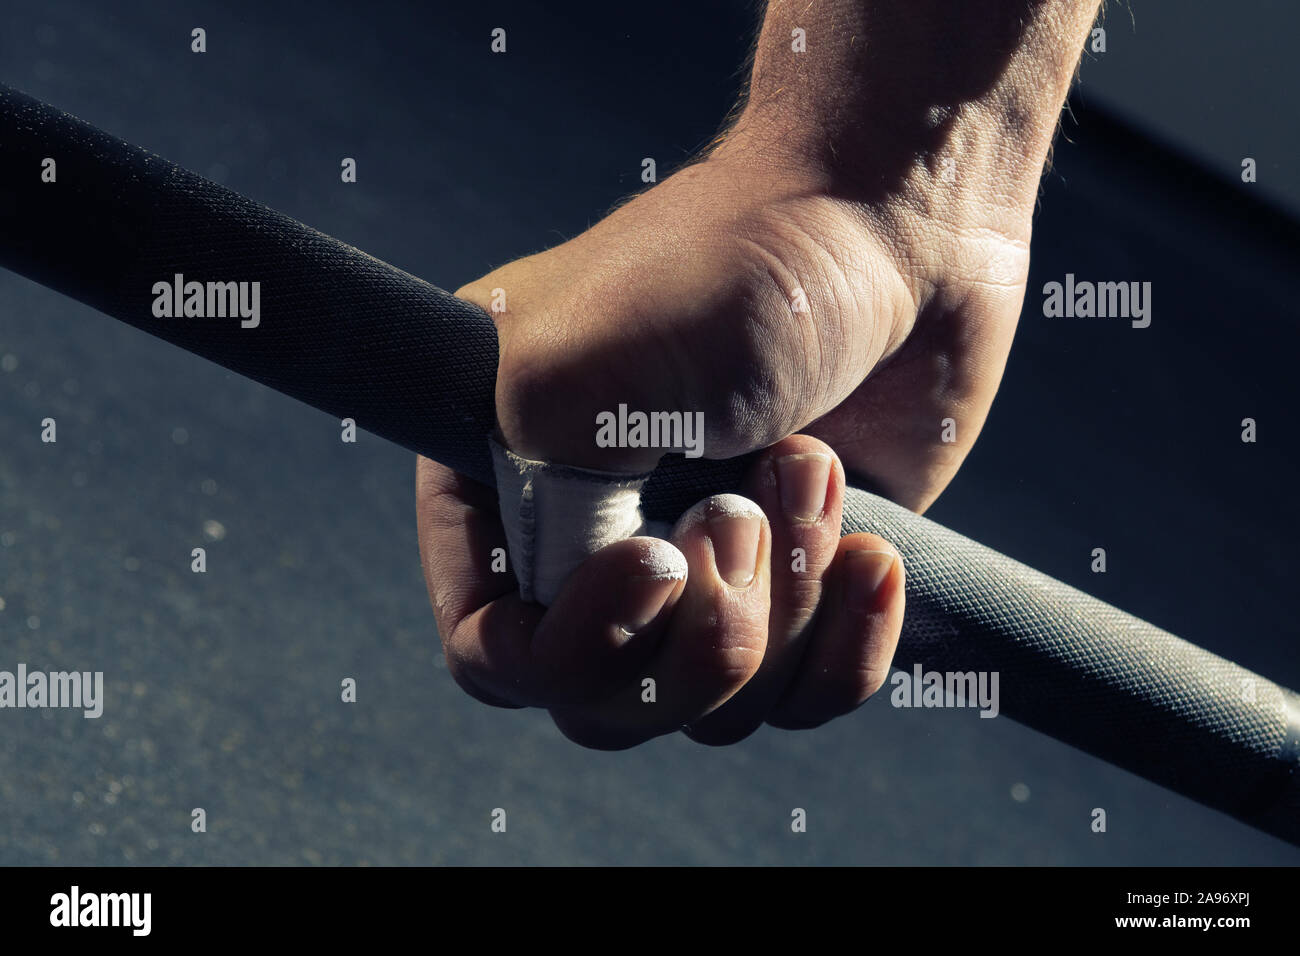 Closeup of man's right hand gripping a barbell with a hook grip Stock Photo